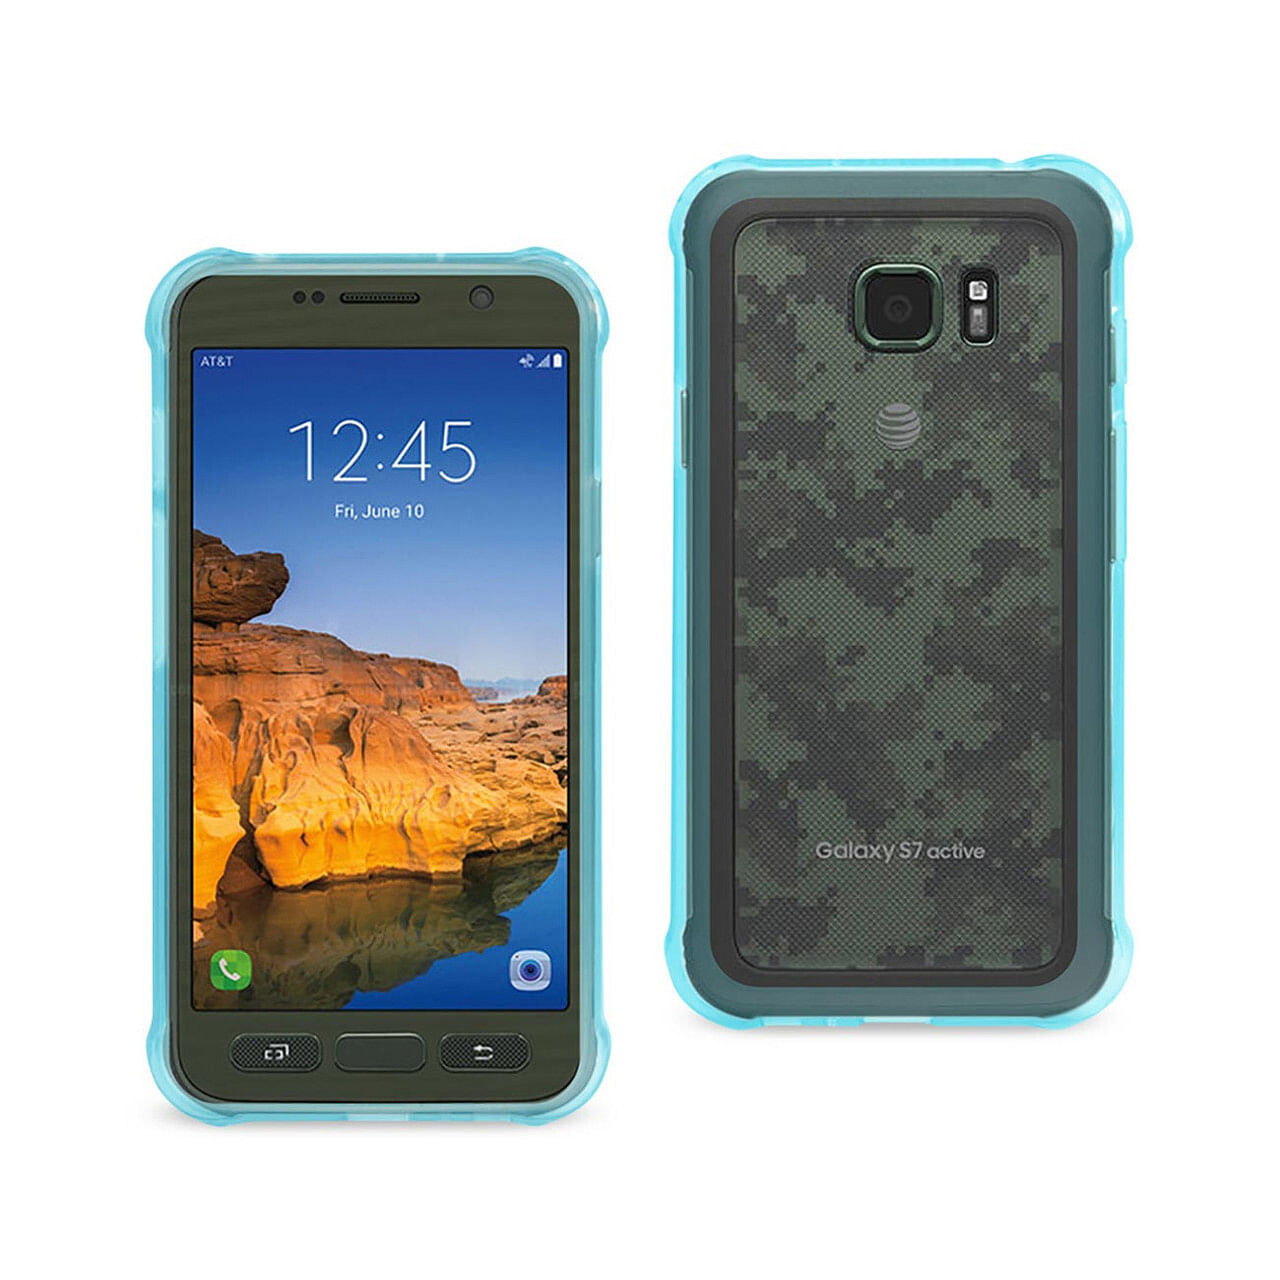 Blue Clear TPU Bumper Case for Samsung Galaxy S7 Active - Shockproof Armor USA - $18.79